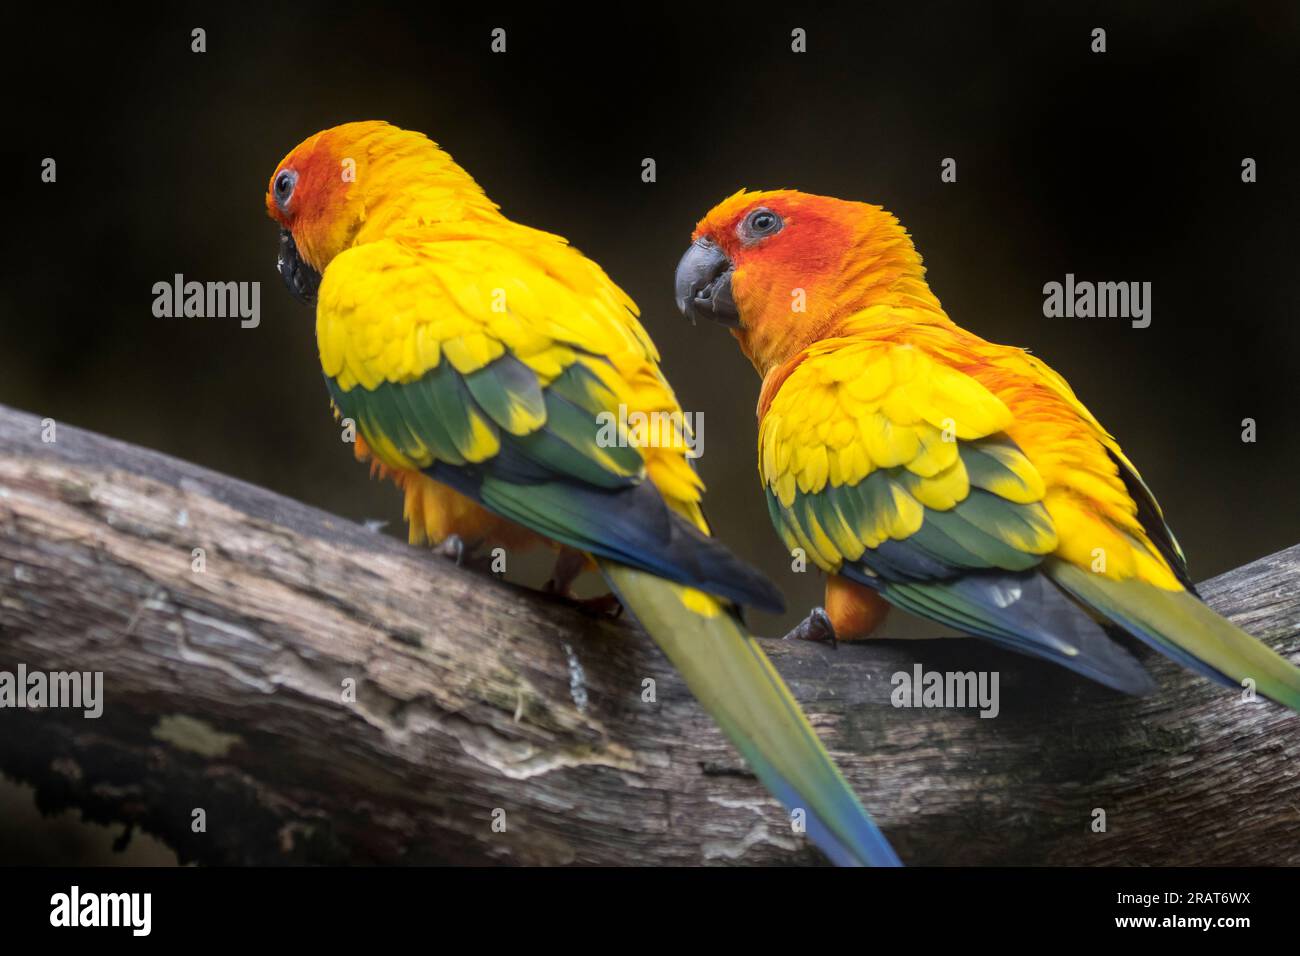 Two sun parakeets / sun conures (Aratinga solstitialis) perched in tree, medium-sized, vibrantly colored parrot native to northeastern South America Stock Photo